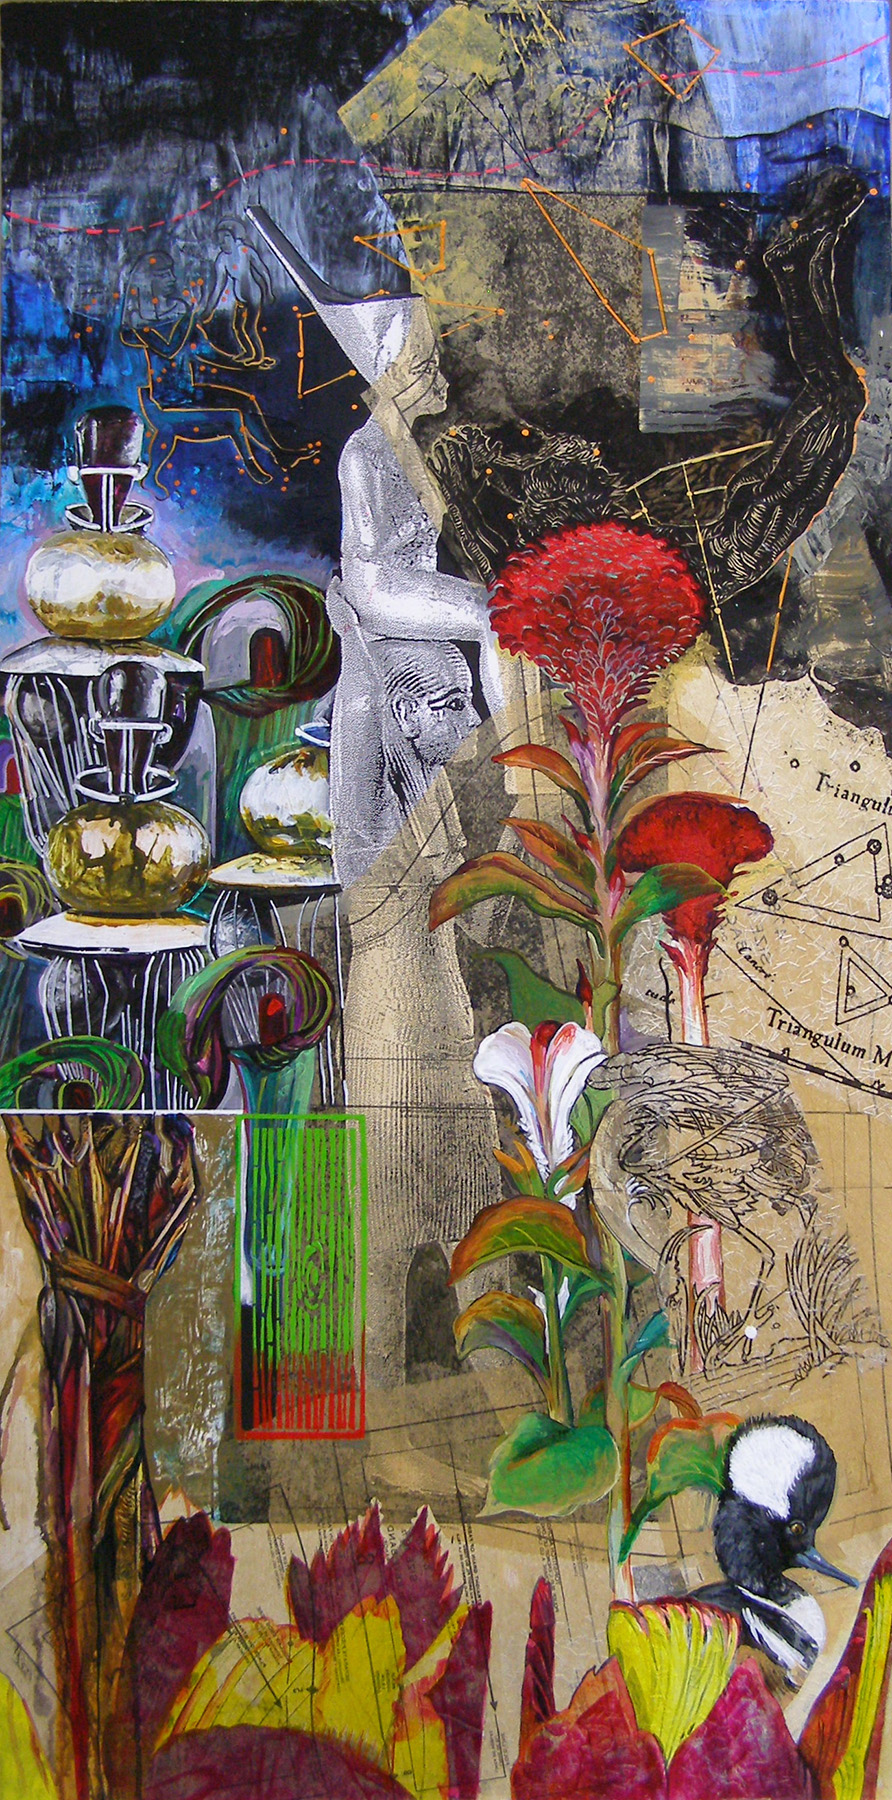  Night Garden: Royal Boy and His Geometry, 24x48”, Mixed Media. Sold